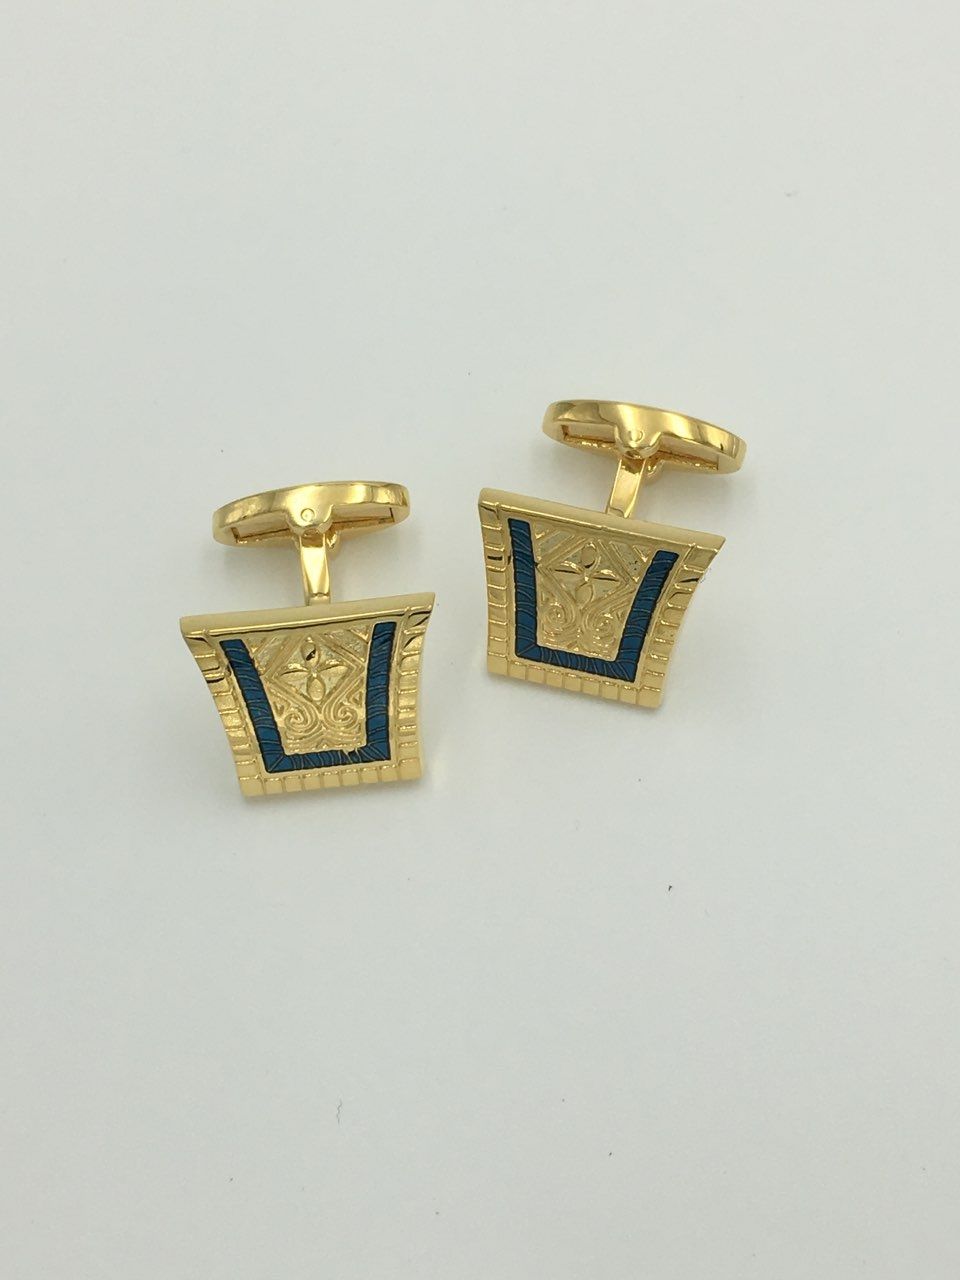 2 Pc. King of the Nile Style Cufflinks - Cobalt Blue